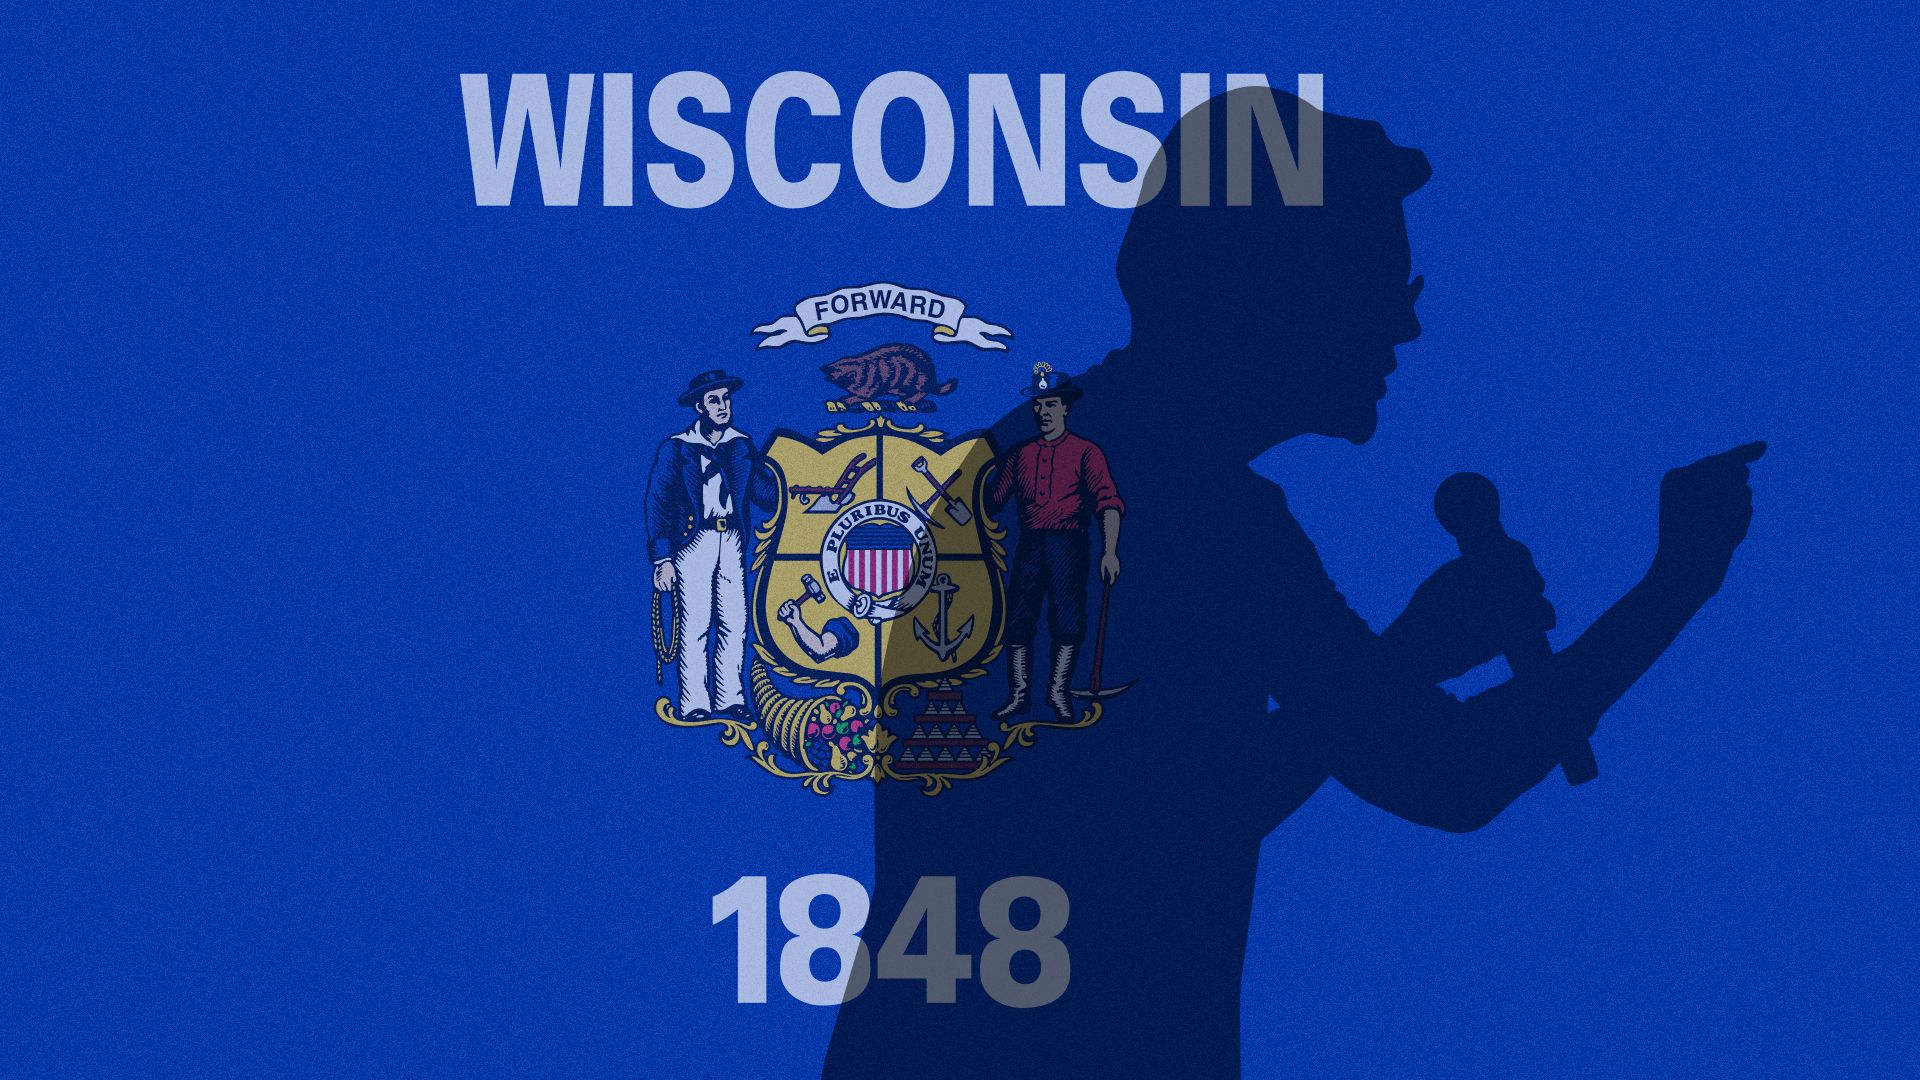 Illustration of Elizabeth Warren's shadow casting over the state flag of Wisconsin